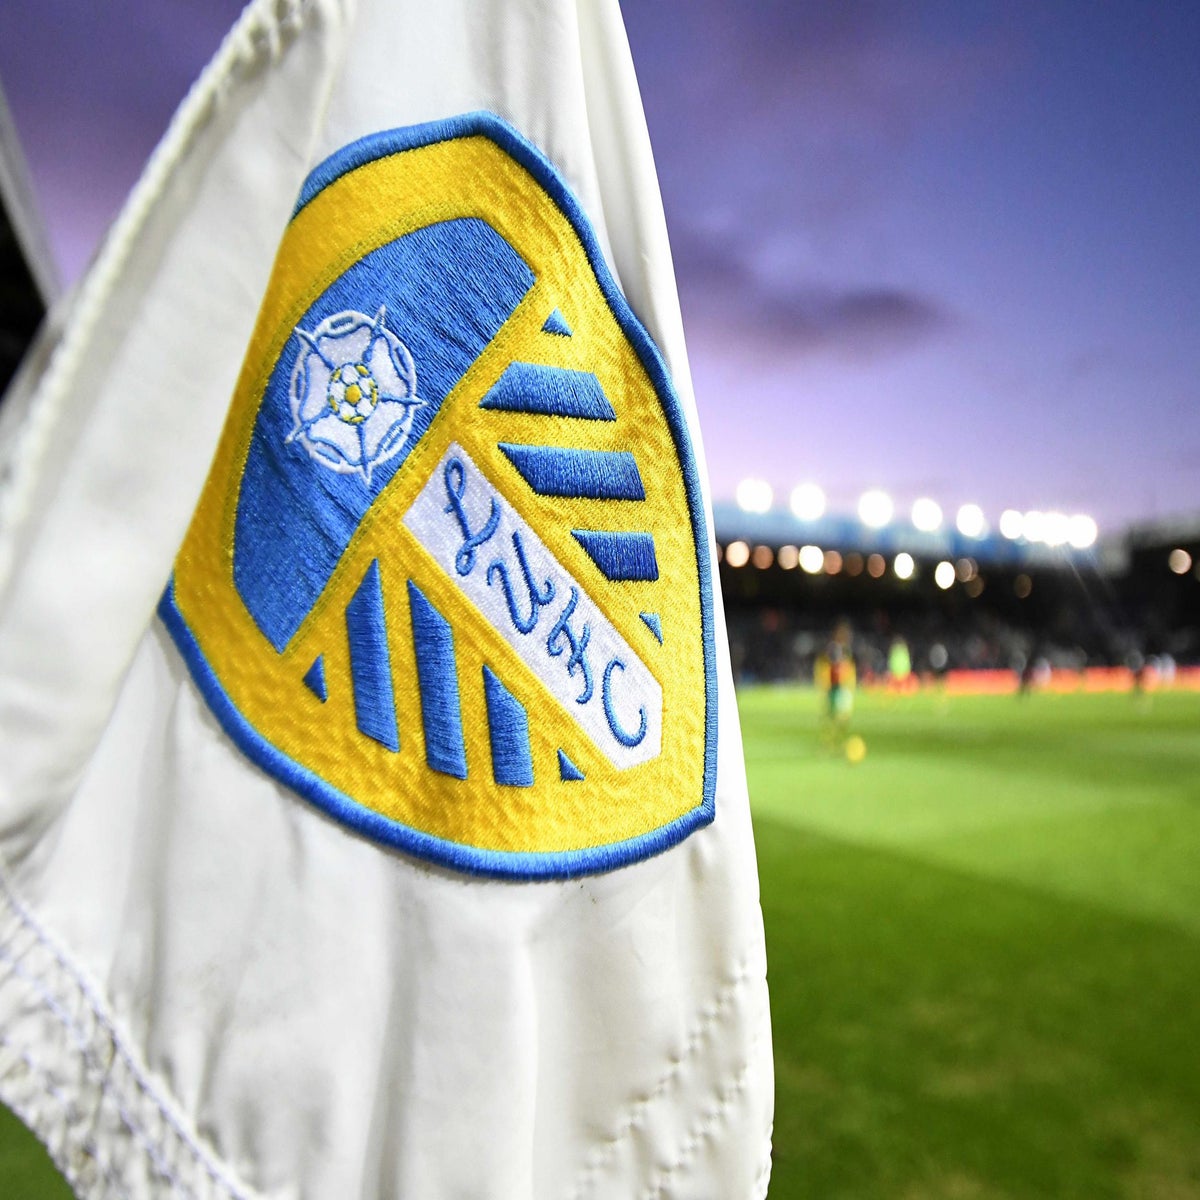 Leeds United news: Owner Andrea Radrizzani considering offers from